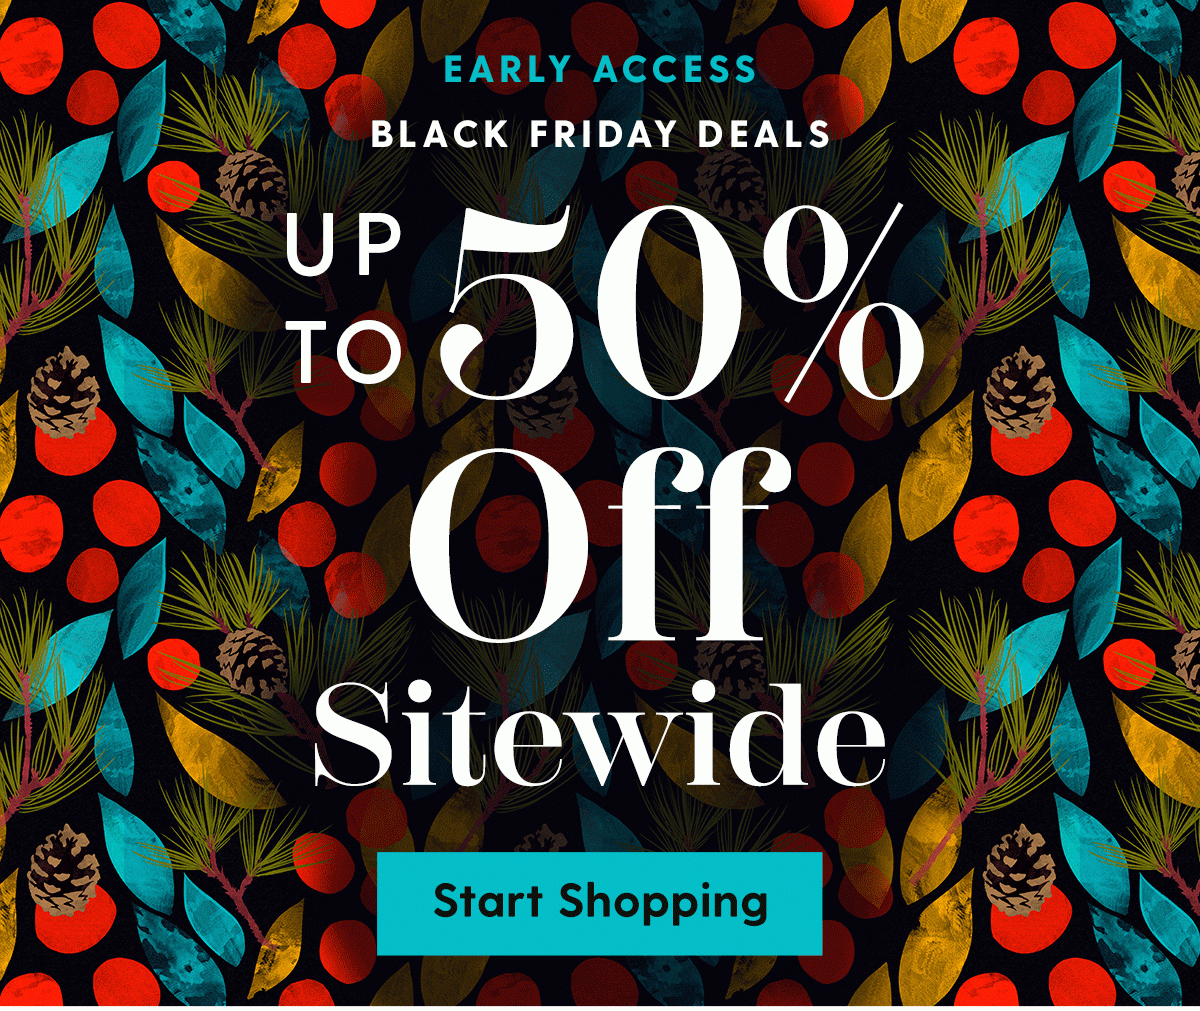 EARLY ACCESS Black Friday Deals | Up to 50% Off Sitewide | Ready, Set, Shop!